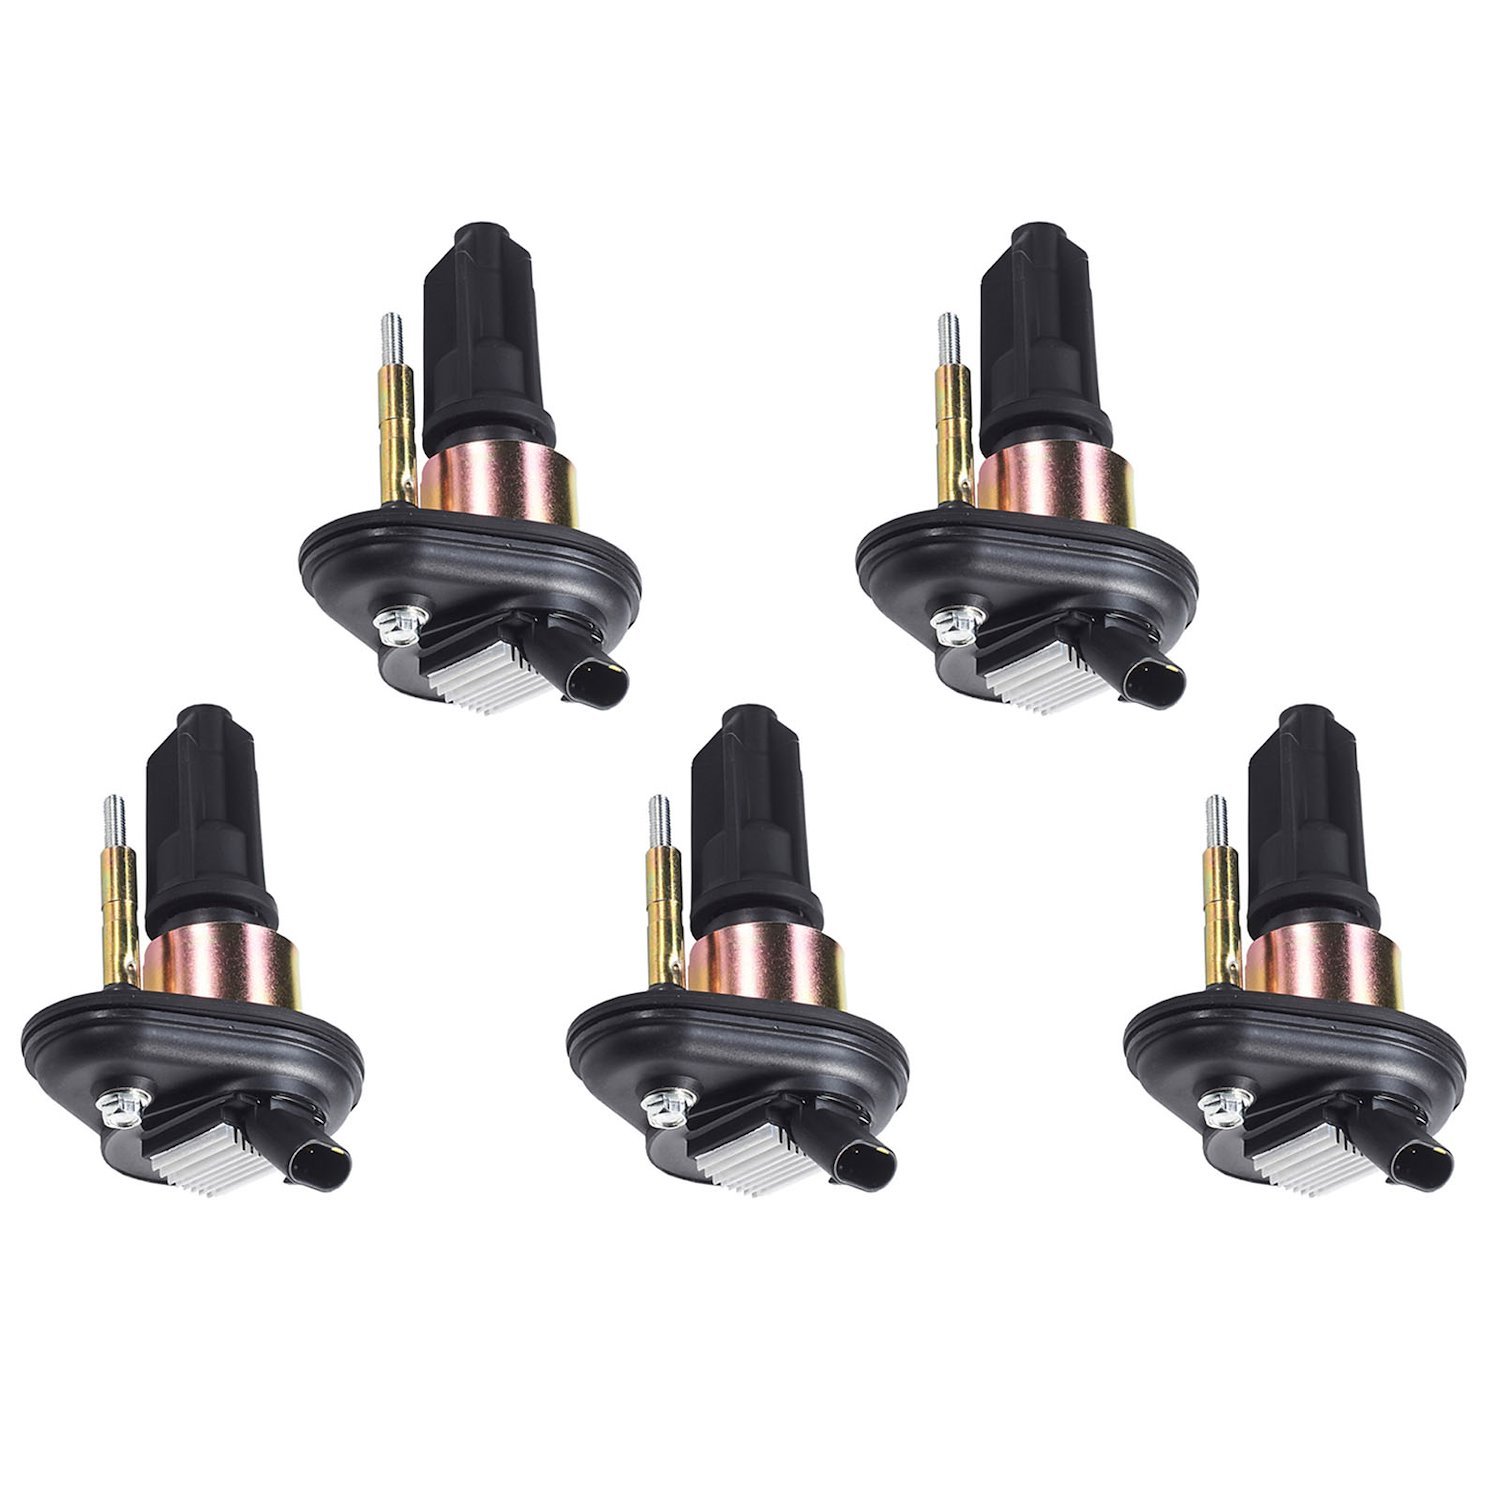 OE Replacement Ignition Coils for 2002-2005 Chevy Trailblazer,